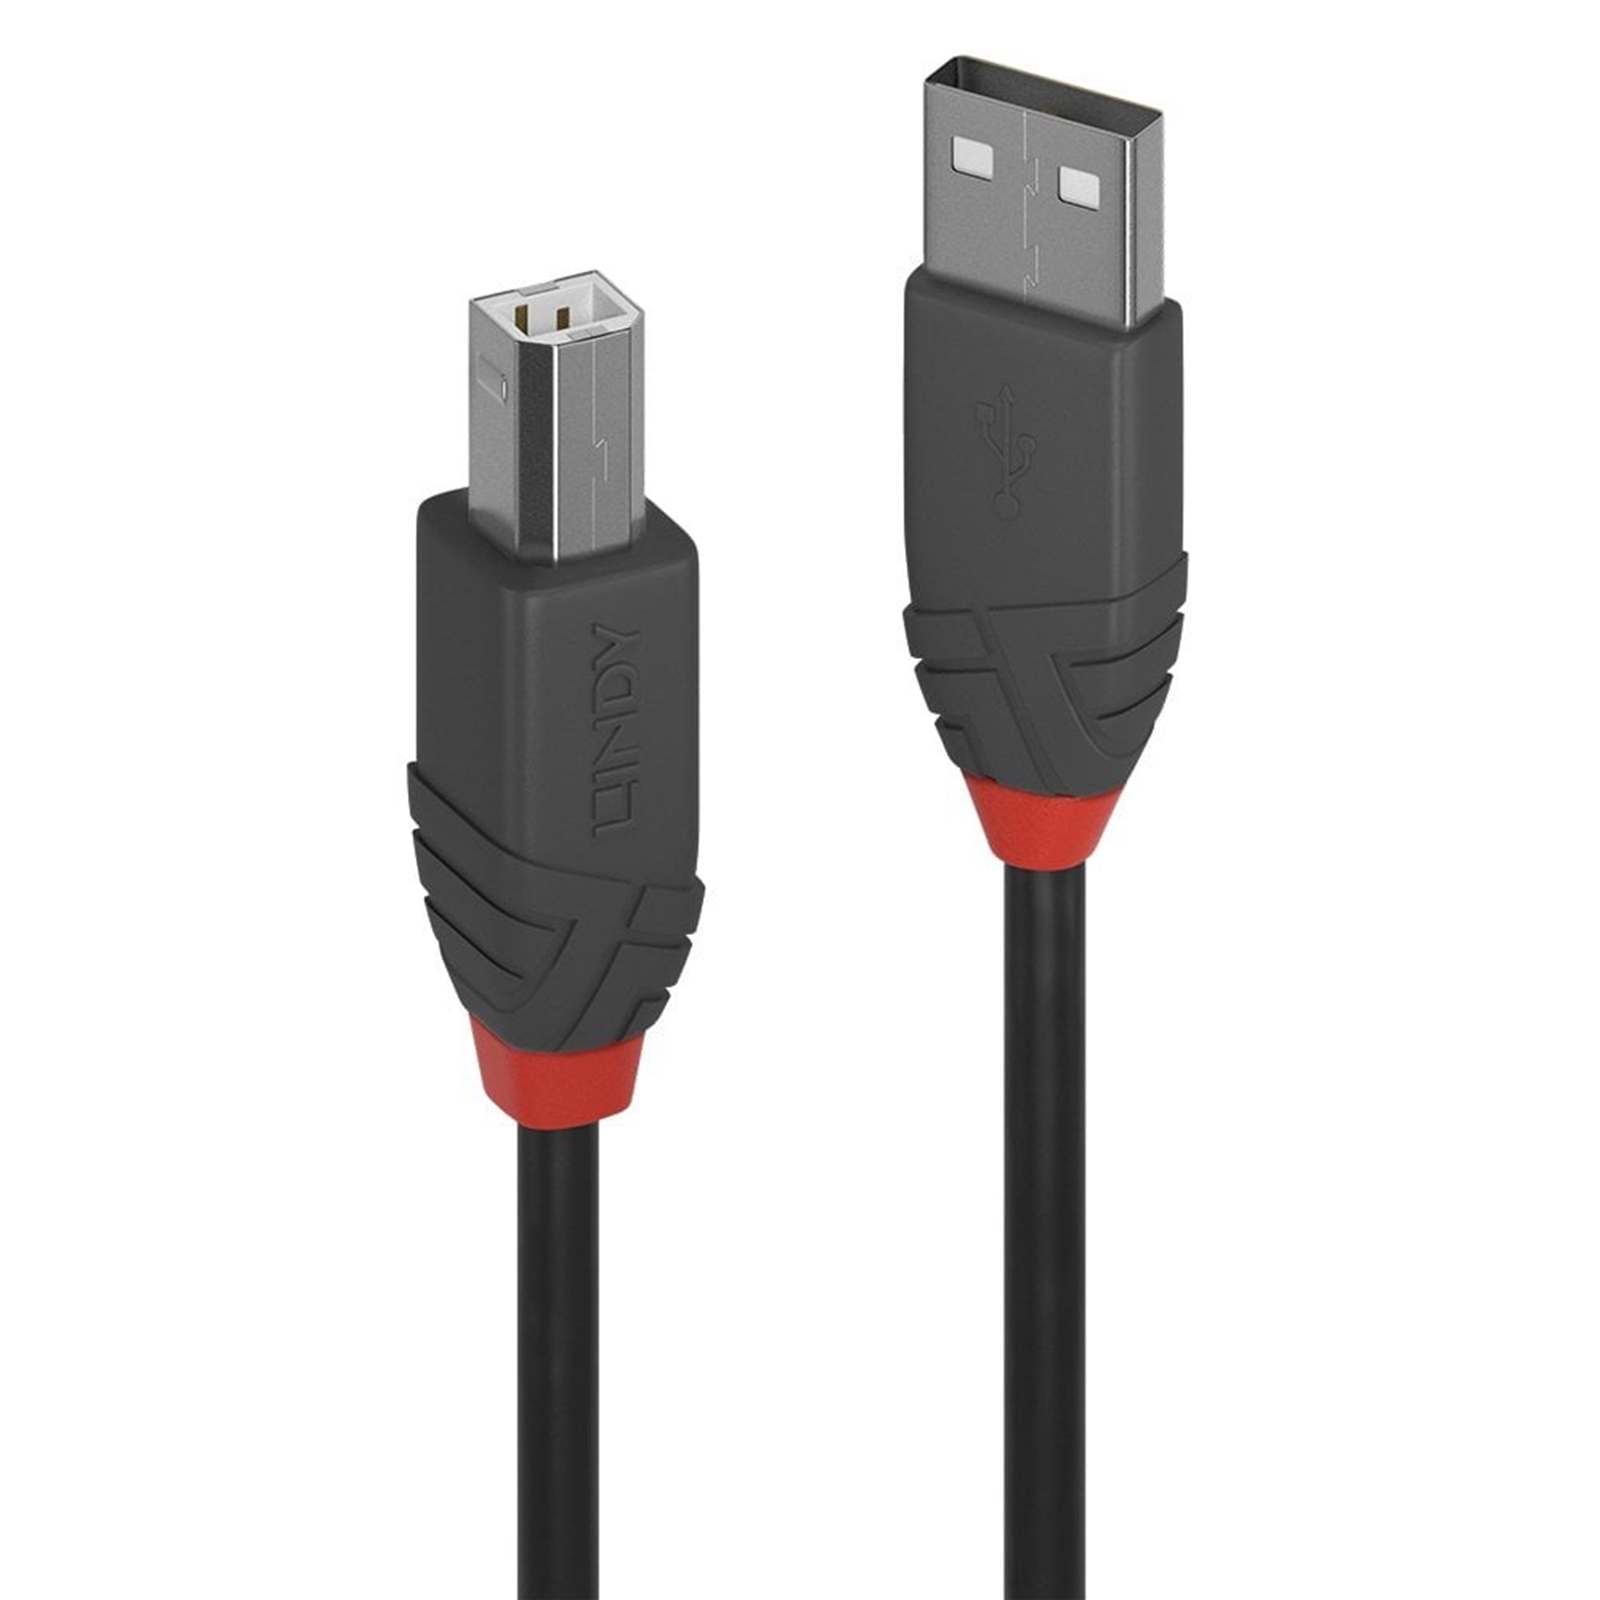 LINDY 36674 Anthra Line USB Cable, USB 2.0 Type-A (M) to USB 2.0 Type-B (M), 3m, Black & Red, Supports Data Transfer Speeds up to 480Mbps, Robust PVC Housing, Nickel Connectors & Gold Plated Contacts, Retail Polybag Packaging